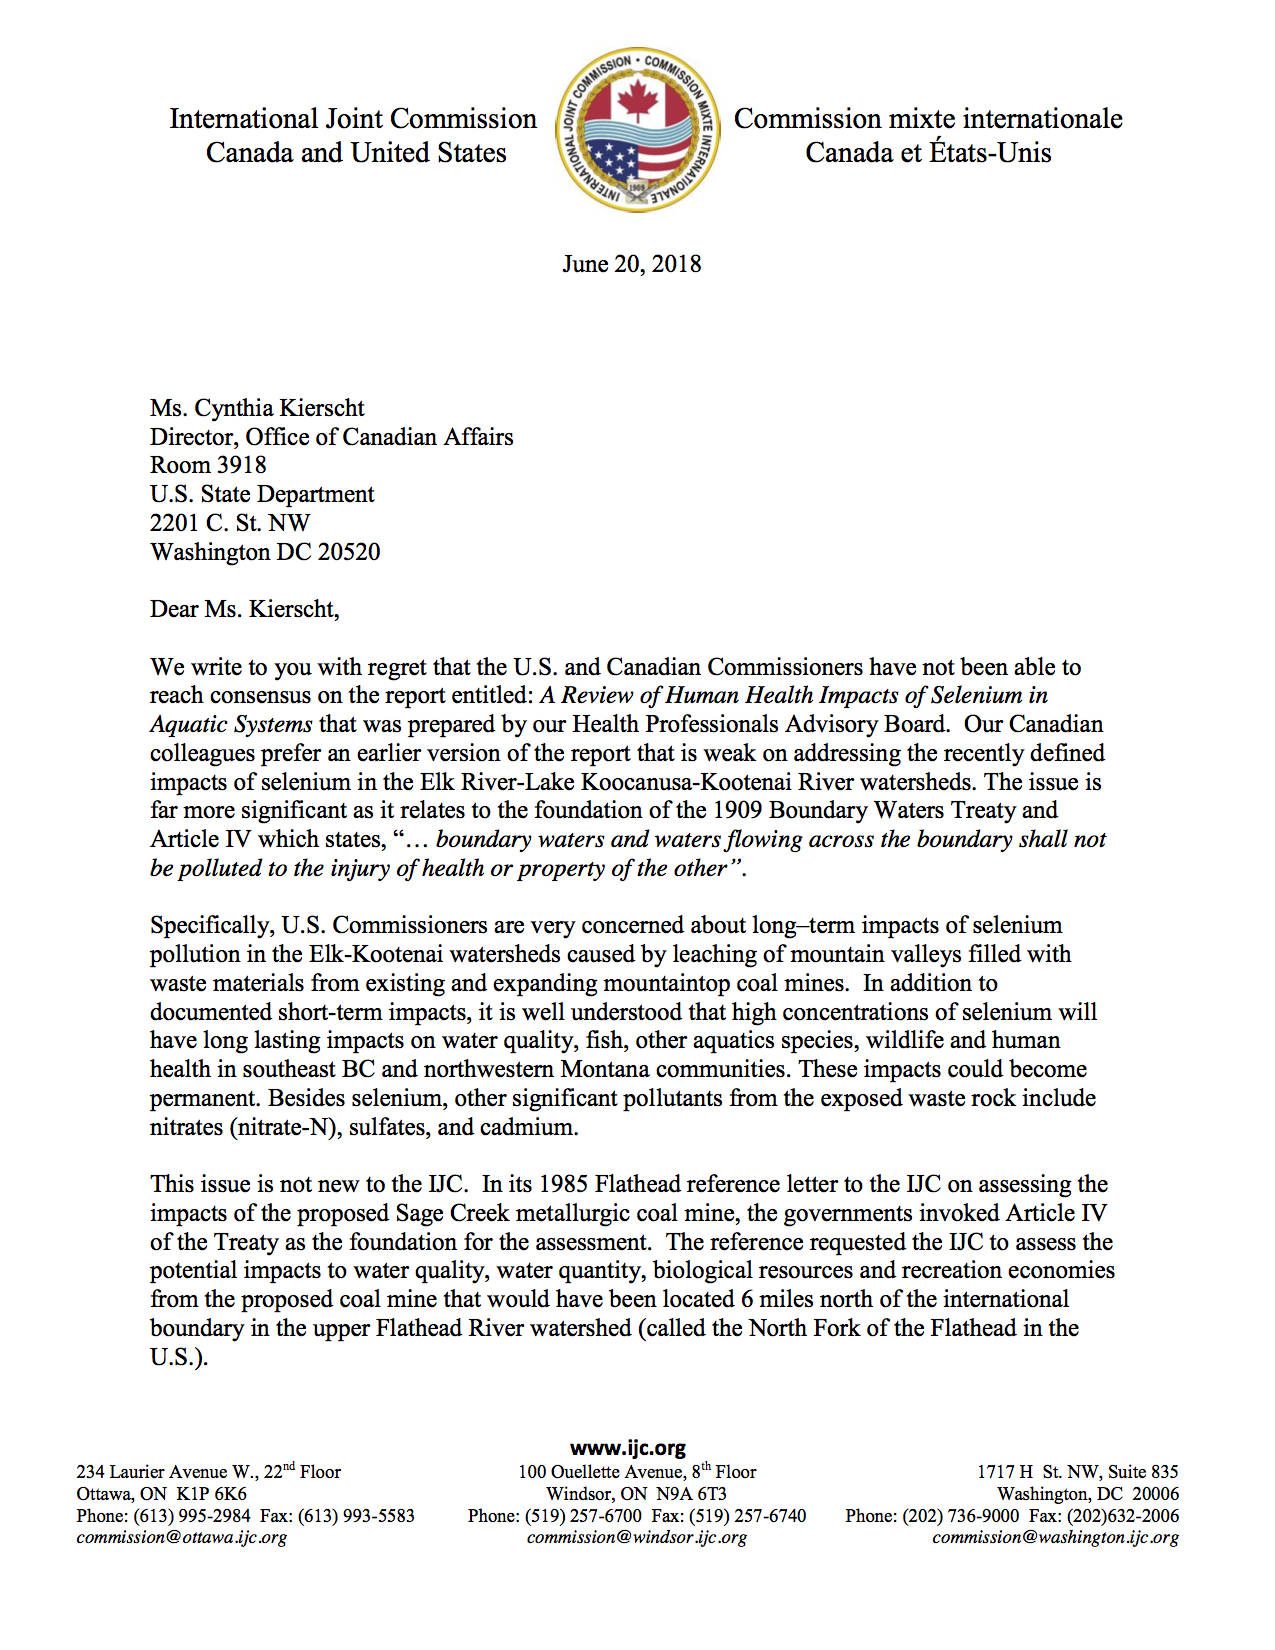 12636034_web1_US-IJC-commissioners-letter-to-Dept-of-State-on-selenium-report